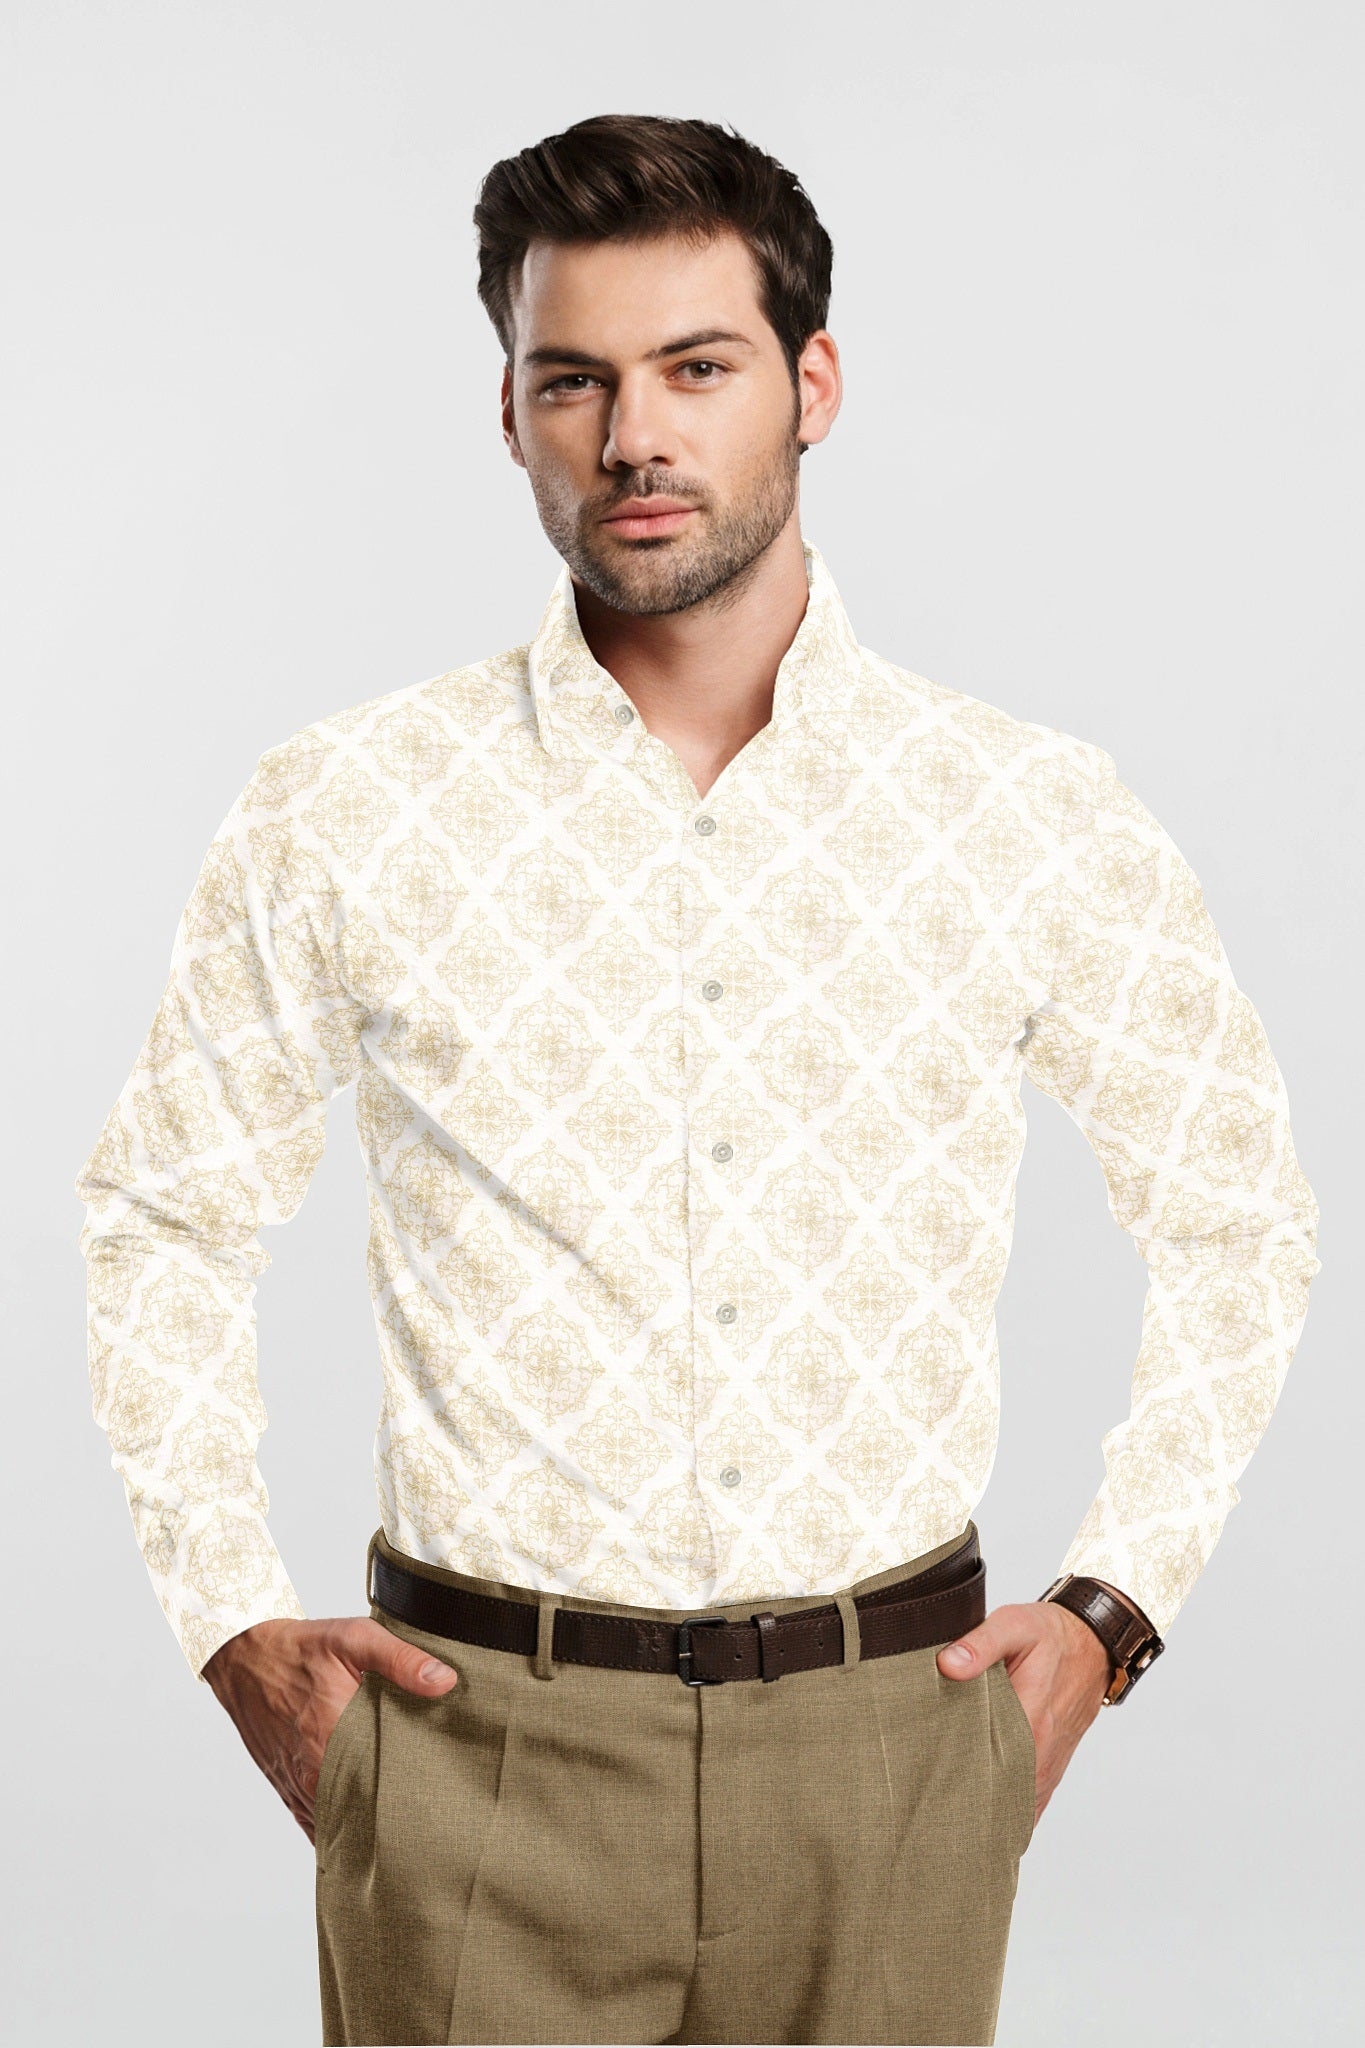 White with Golden Motif Printed Cotton Shirt